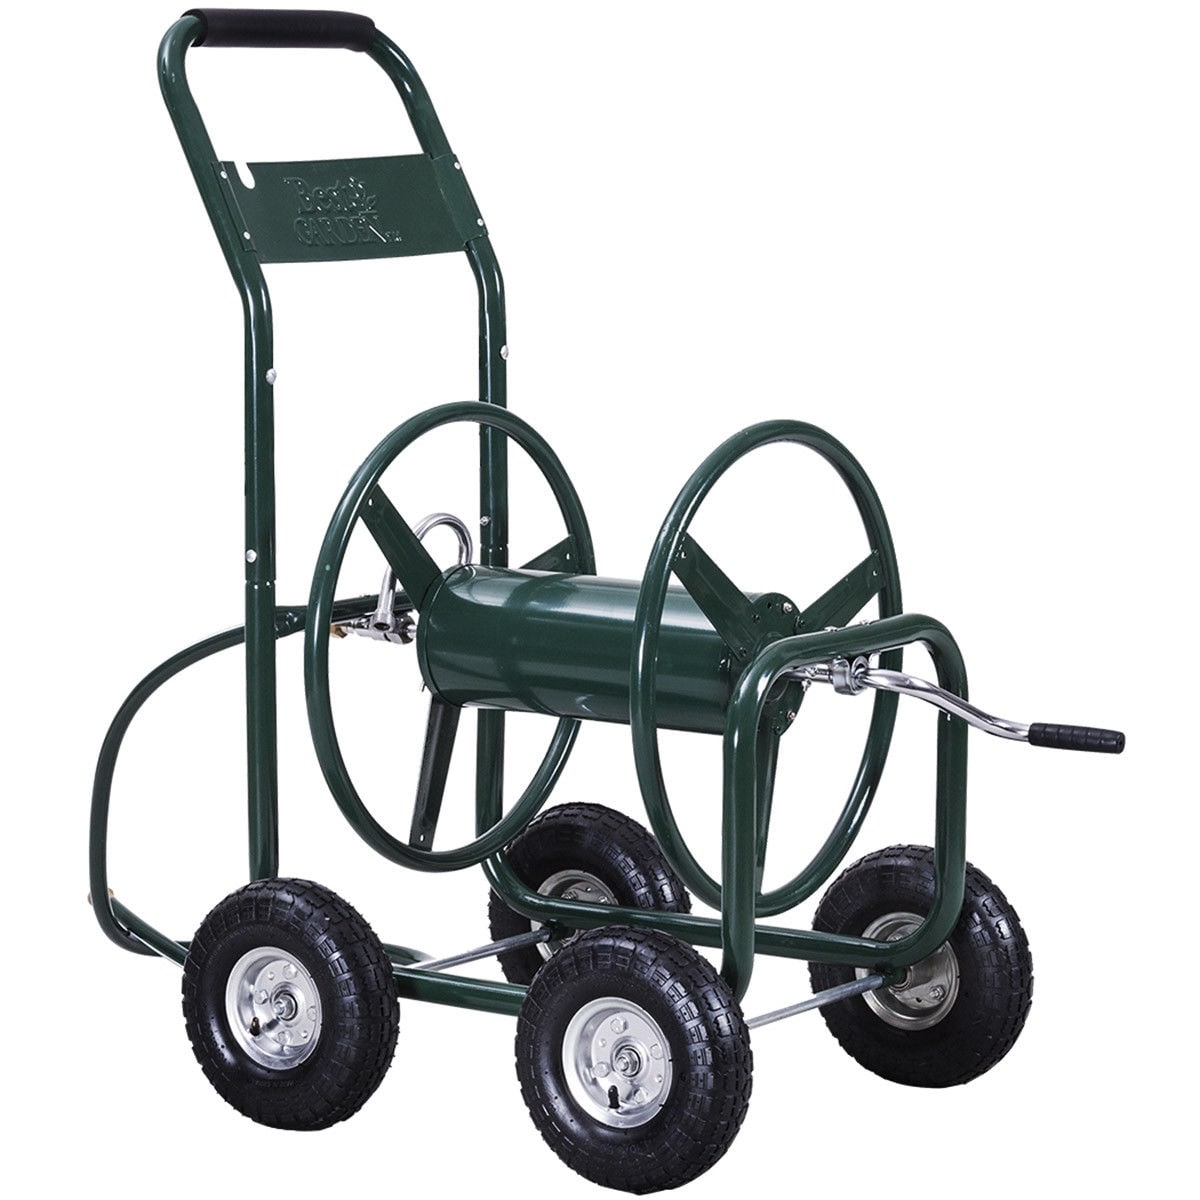 WELLFOR Portable Green Garden Hose Reel Cart with 300 ft Capacity